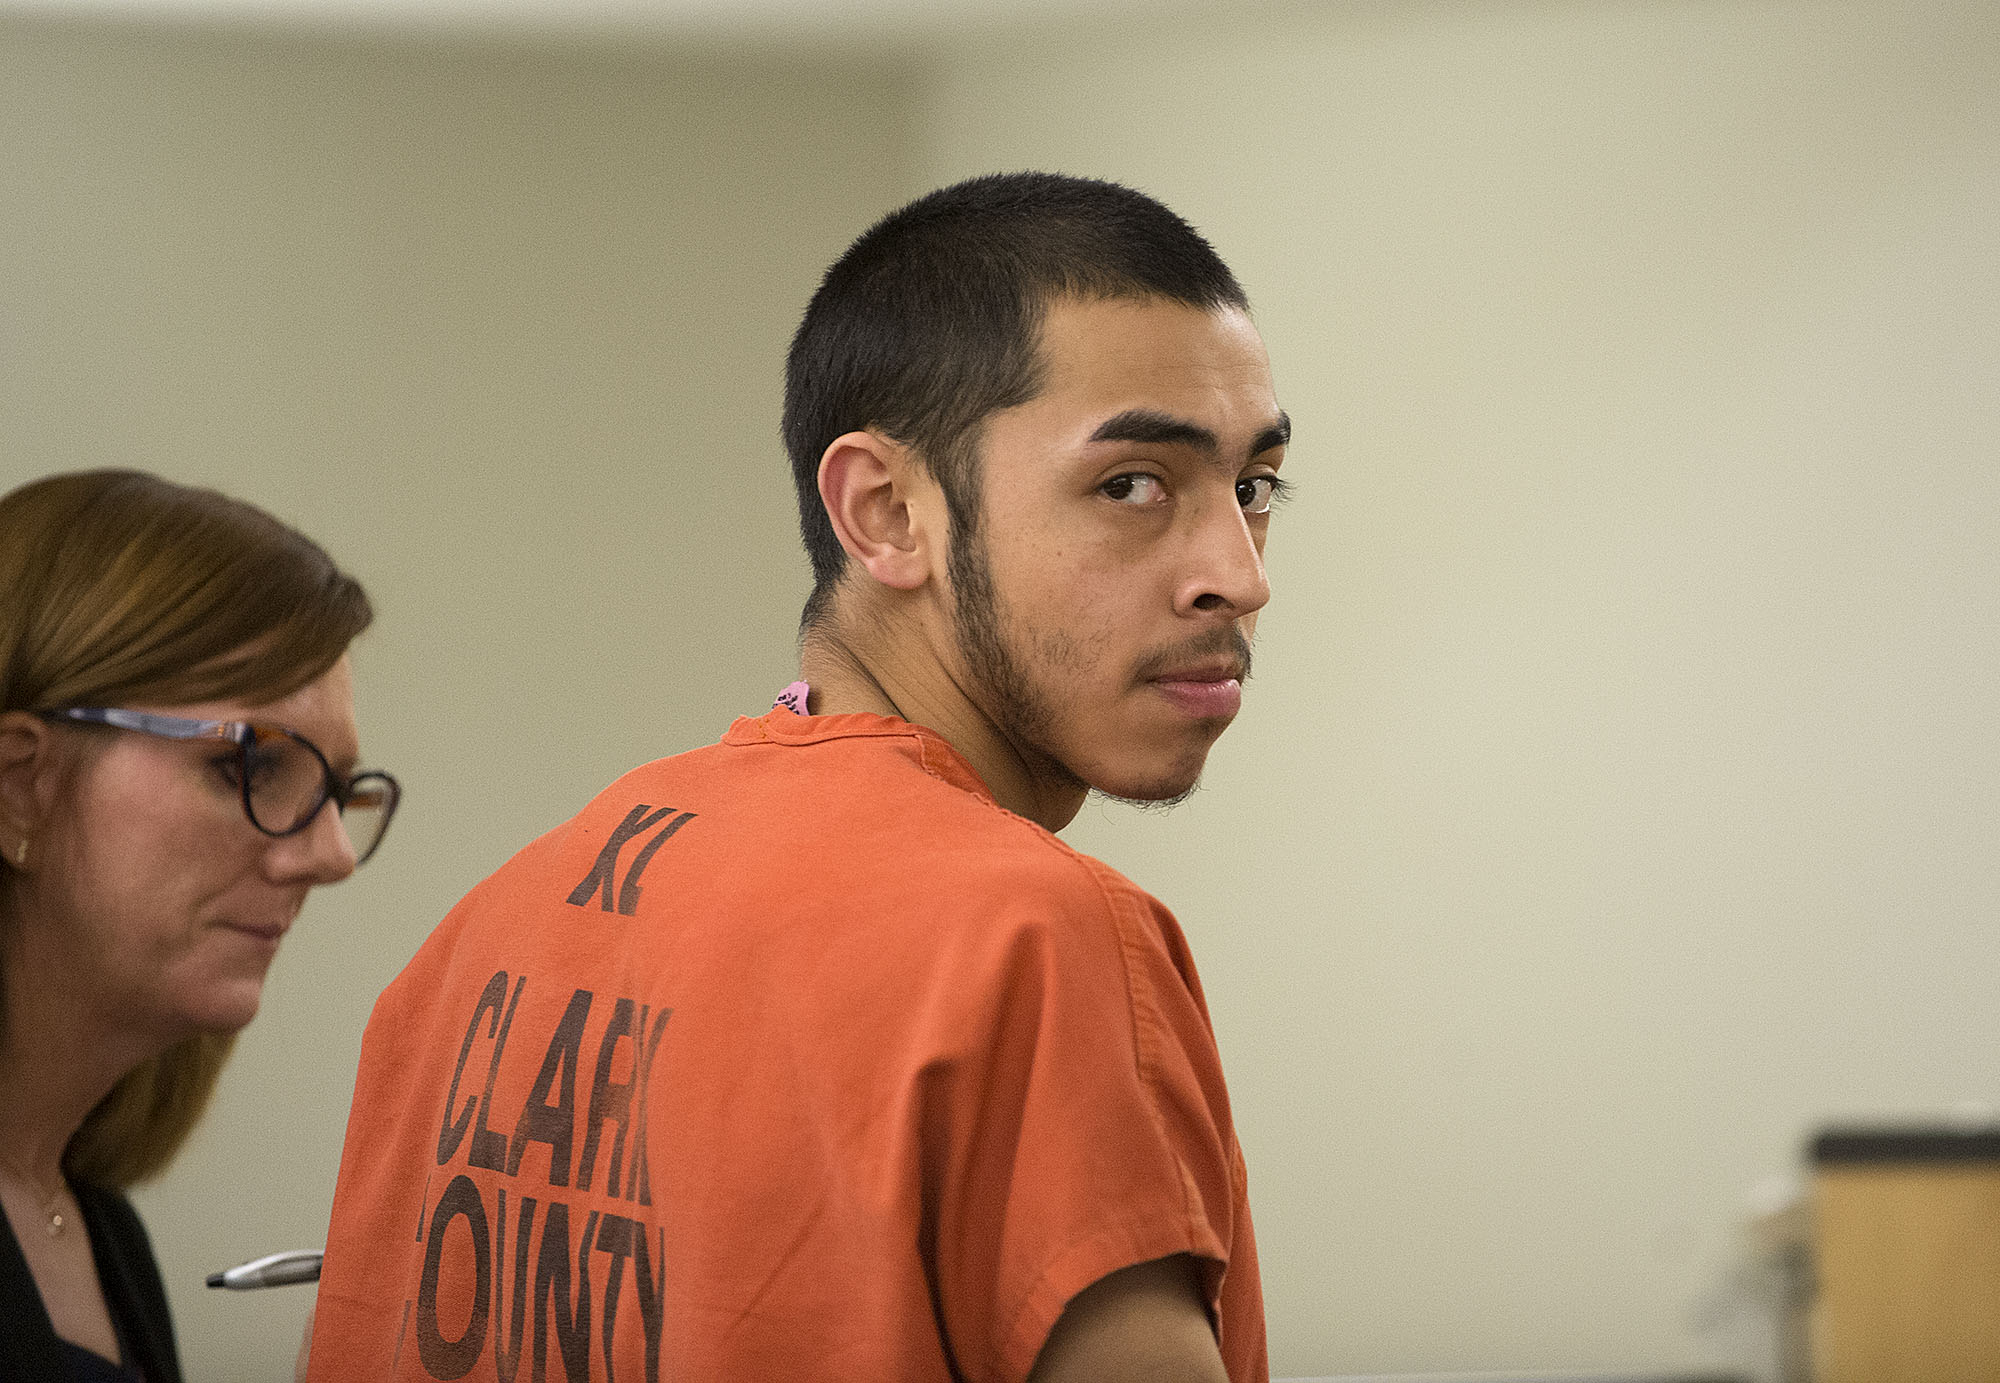 Pedro Franco-Gonzalez makes a first appearance in Clark County Superior Court on Monday morning, Nov. 21, 2016, on suspicion of possessing and detonating explosive devices.